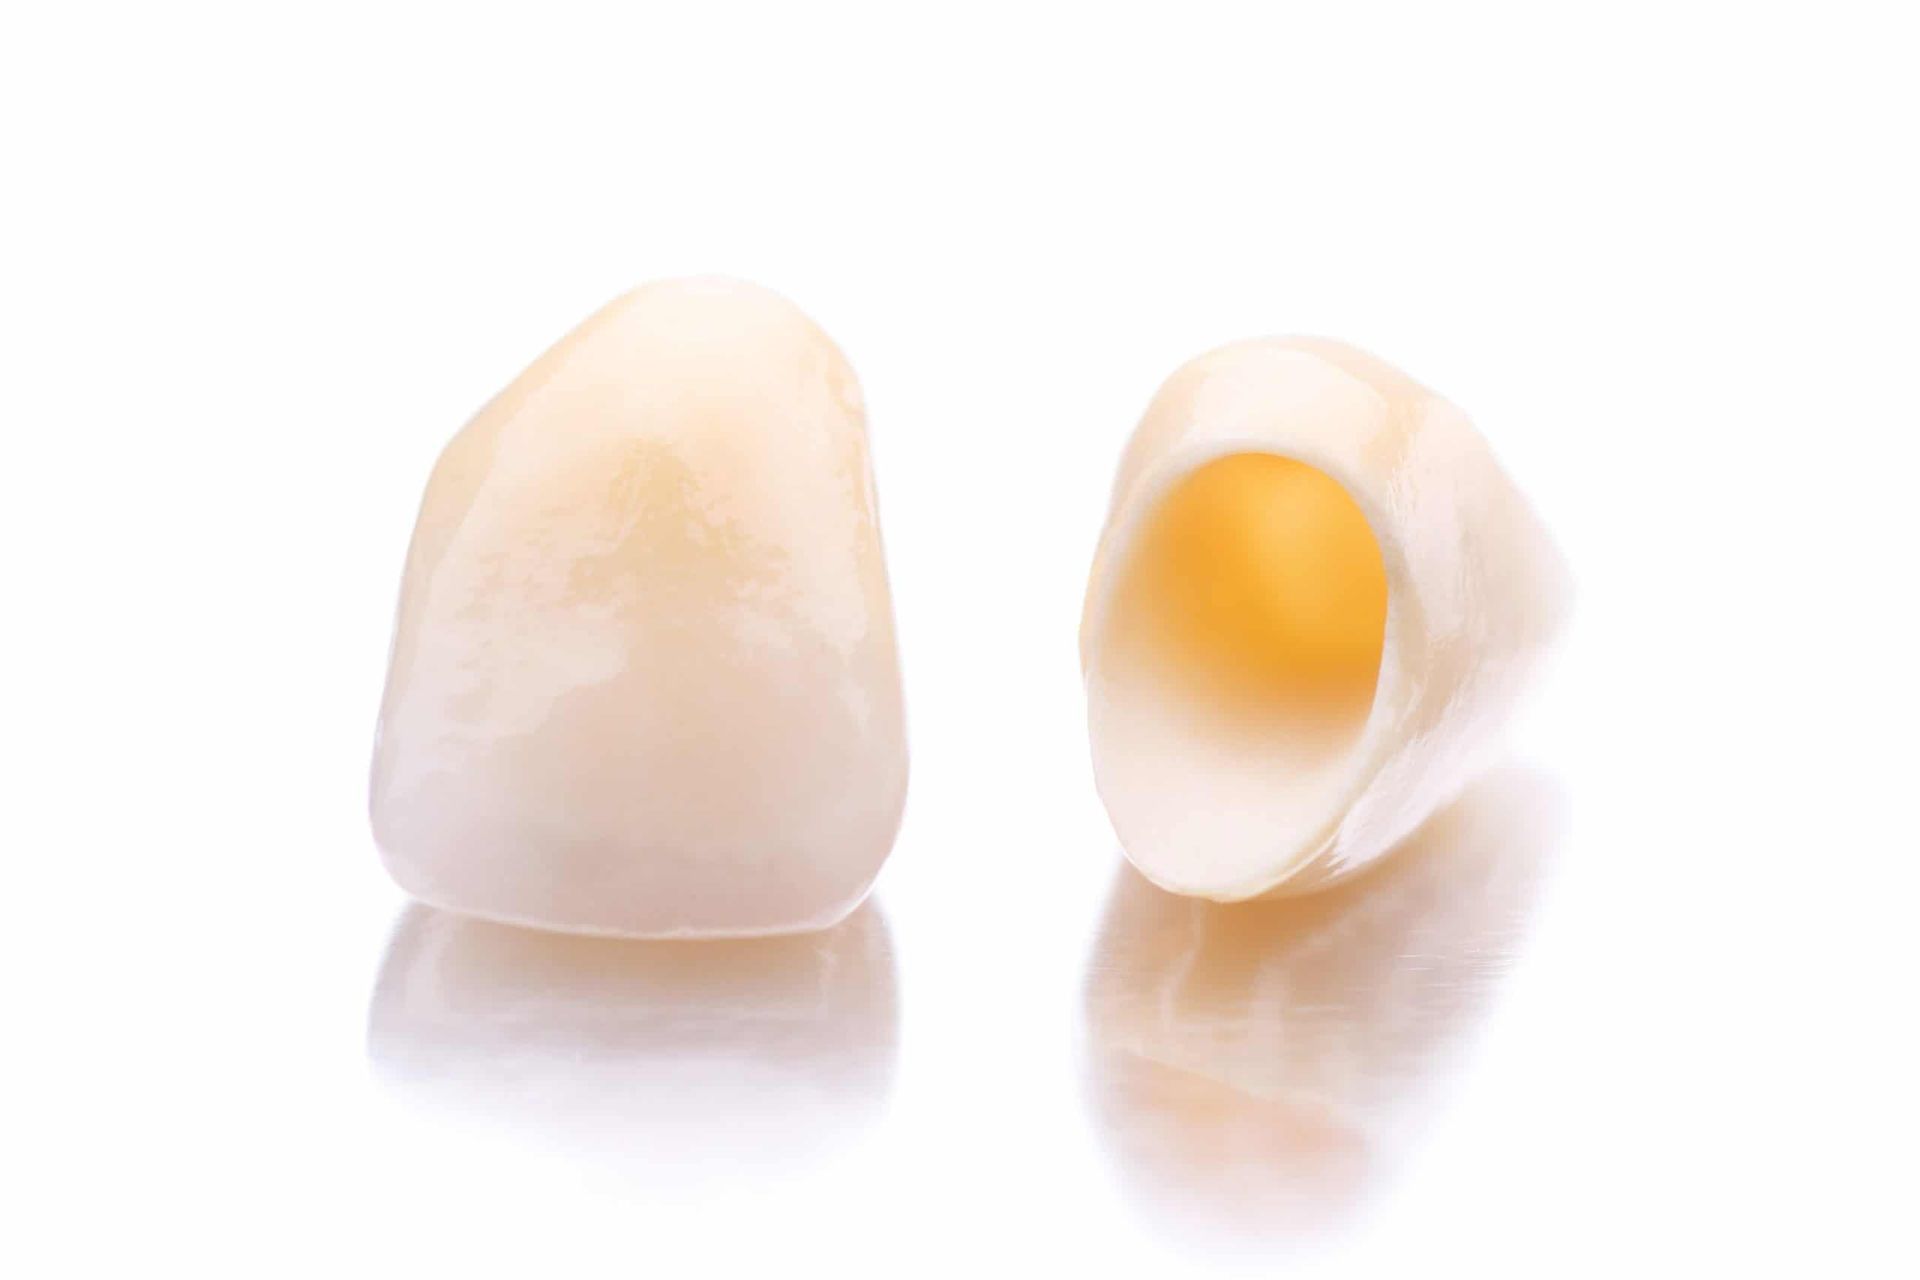 A pair of dental crowns on a white surface.